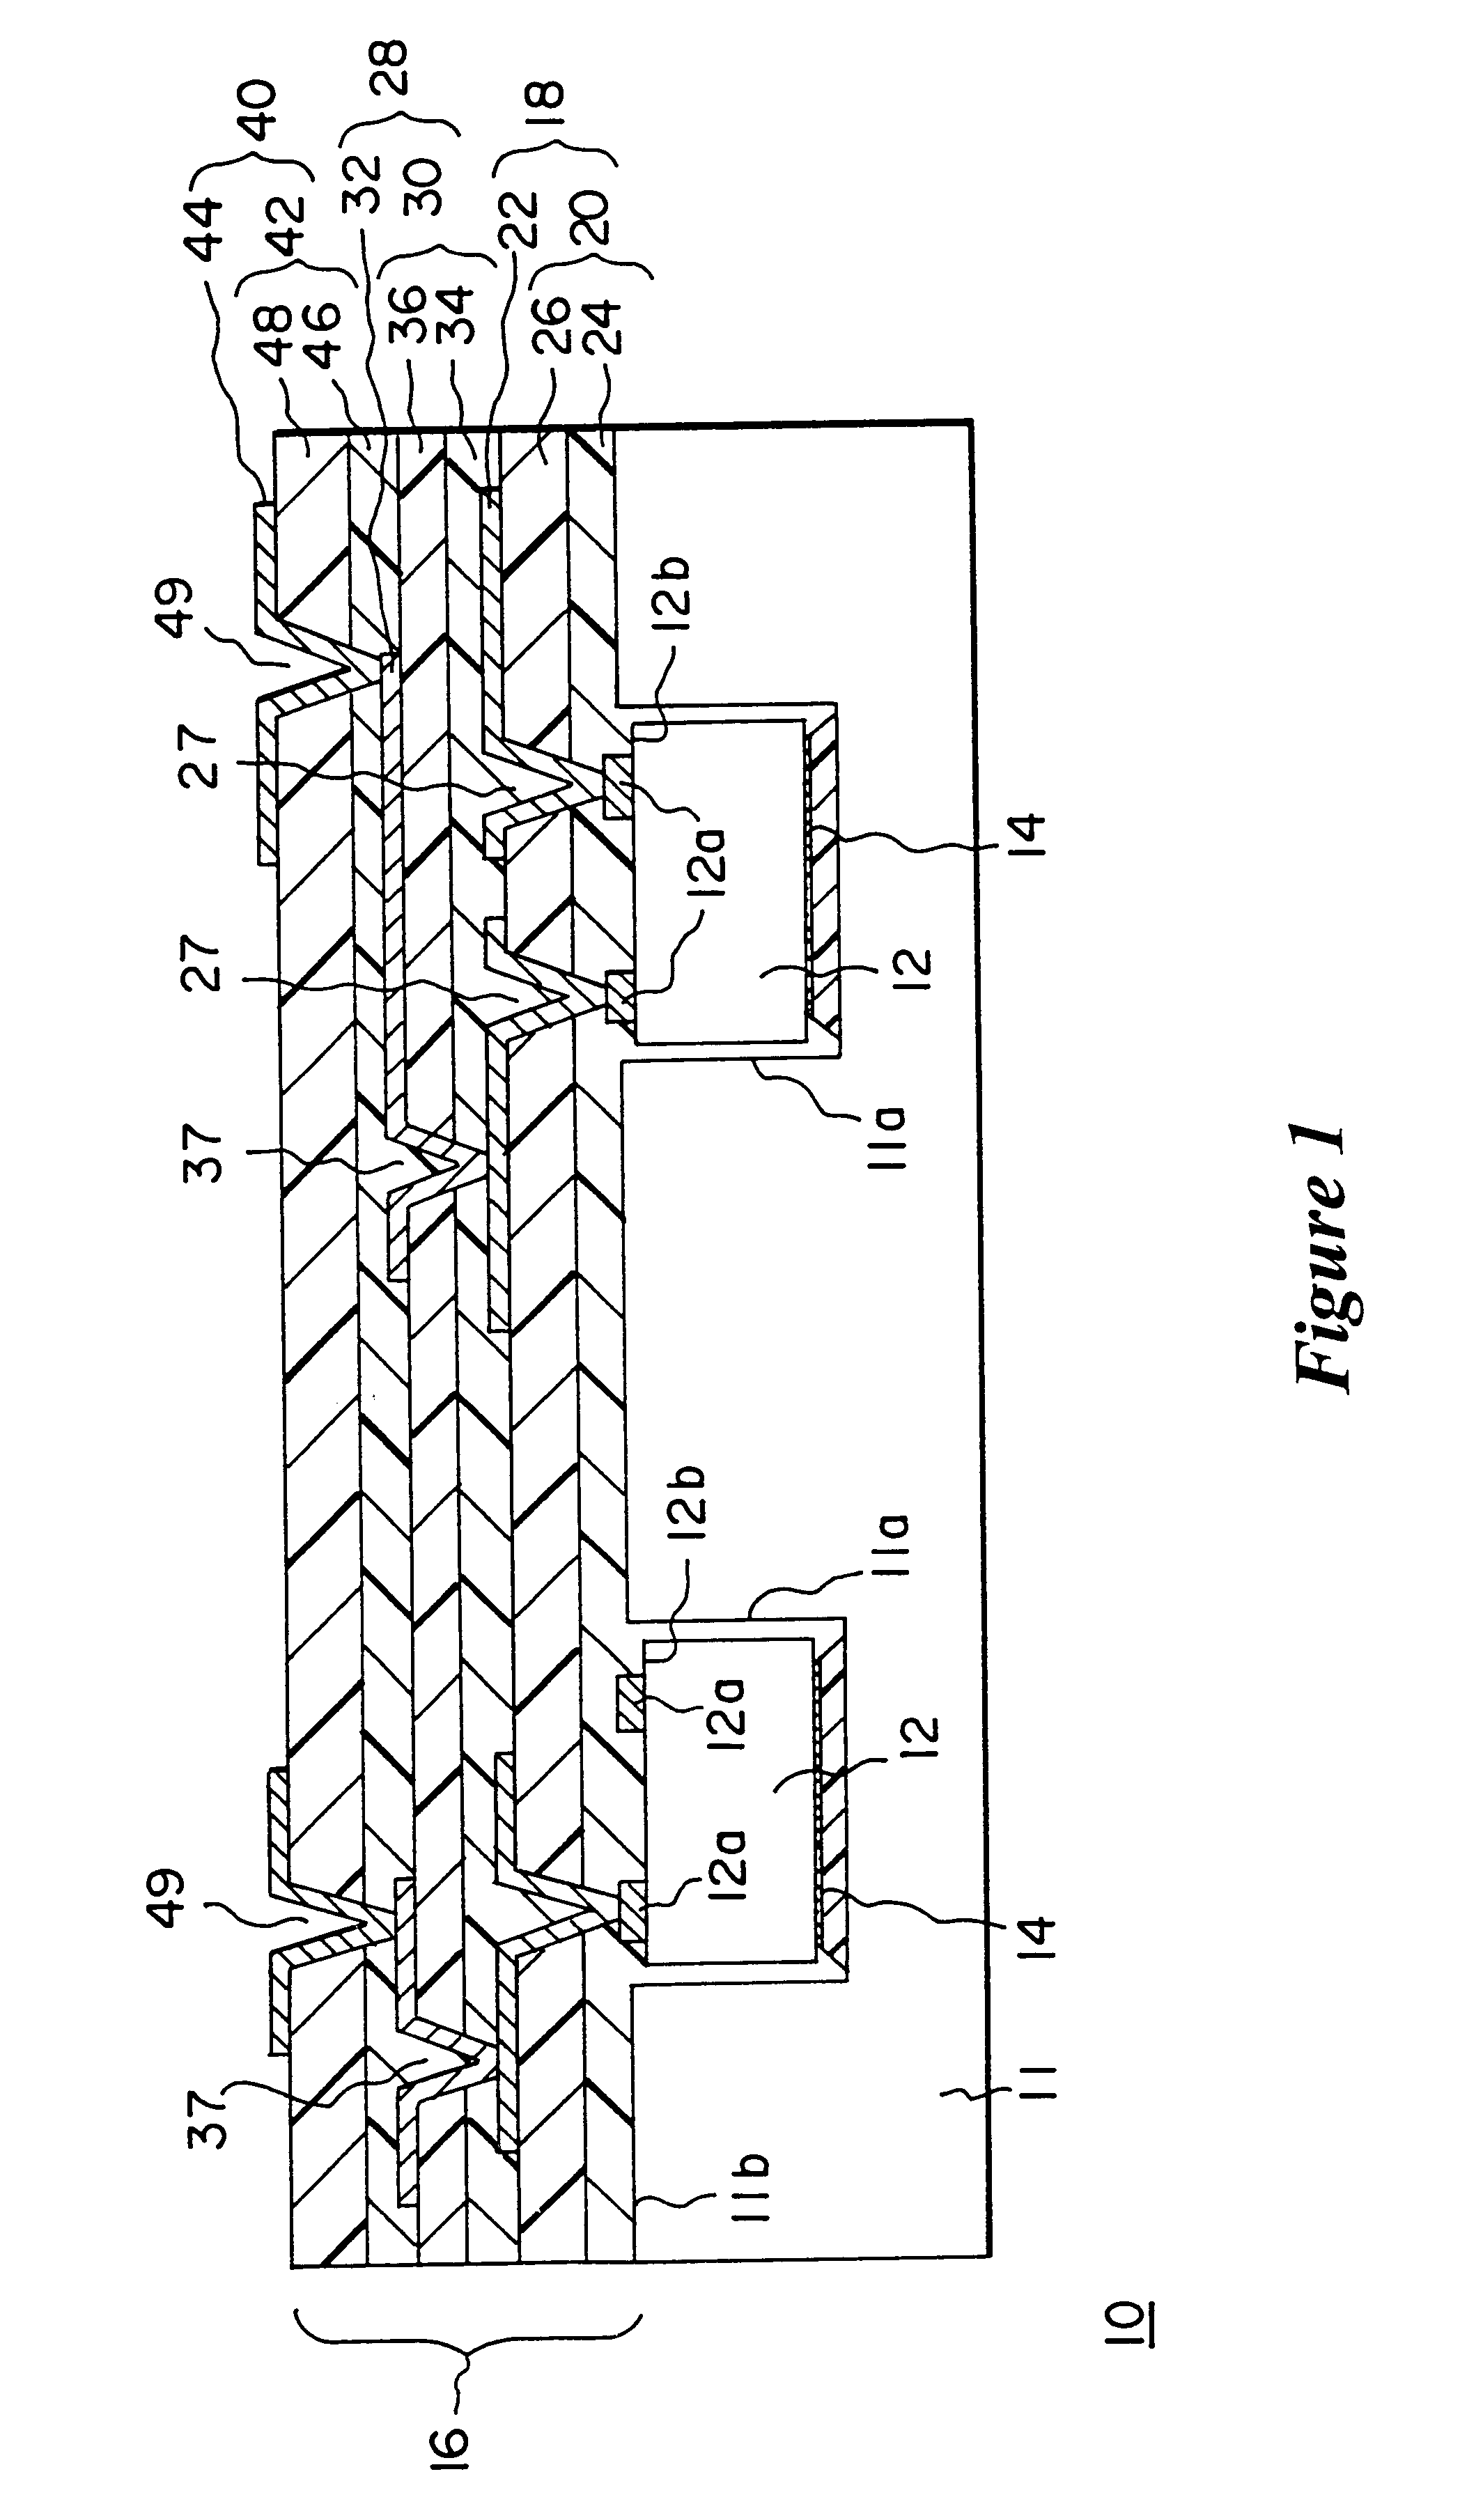 Electronics module having high density interconnect structures incorporating an improved dielectric lamination adhesive